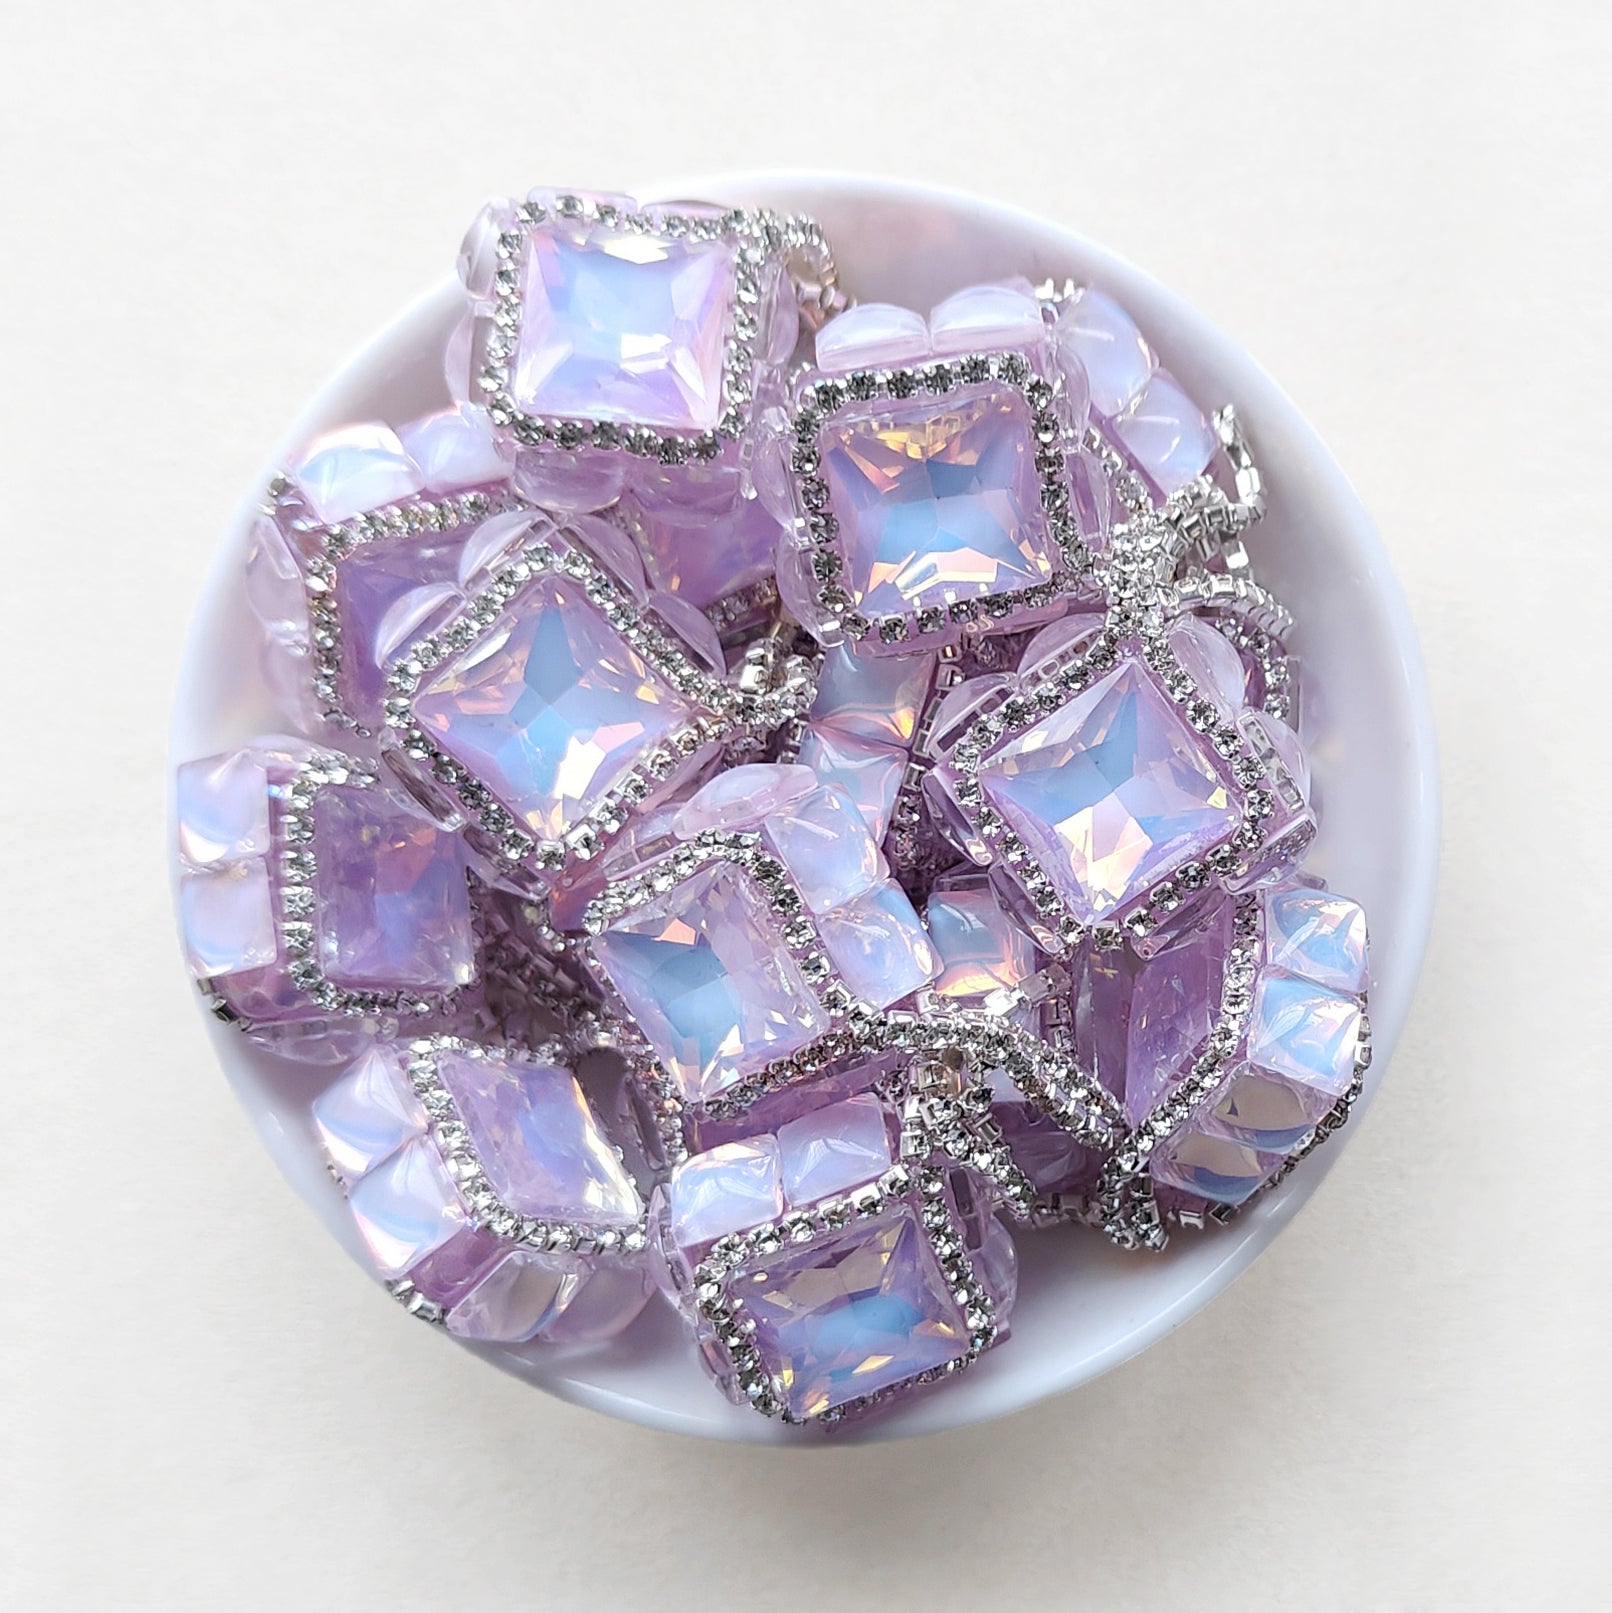 Sparkling Lilac Square Gem Beads, Bling Dangly Beads,Pen Focal ...